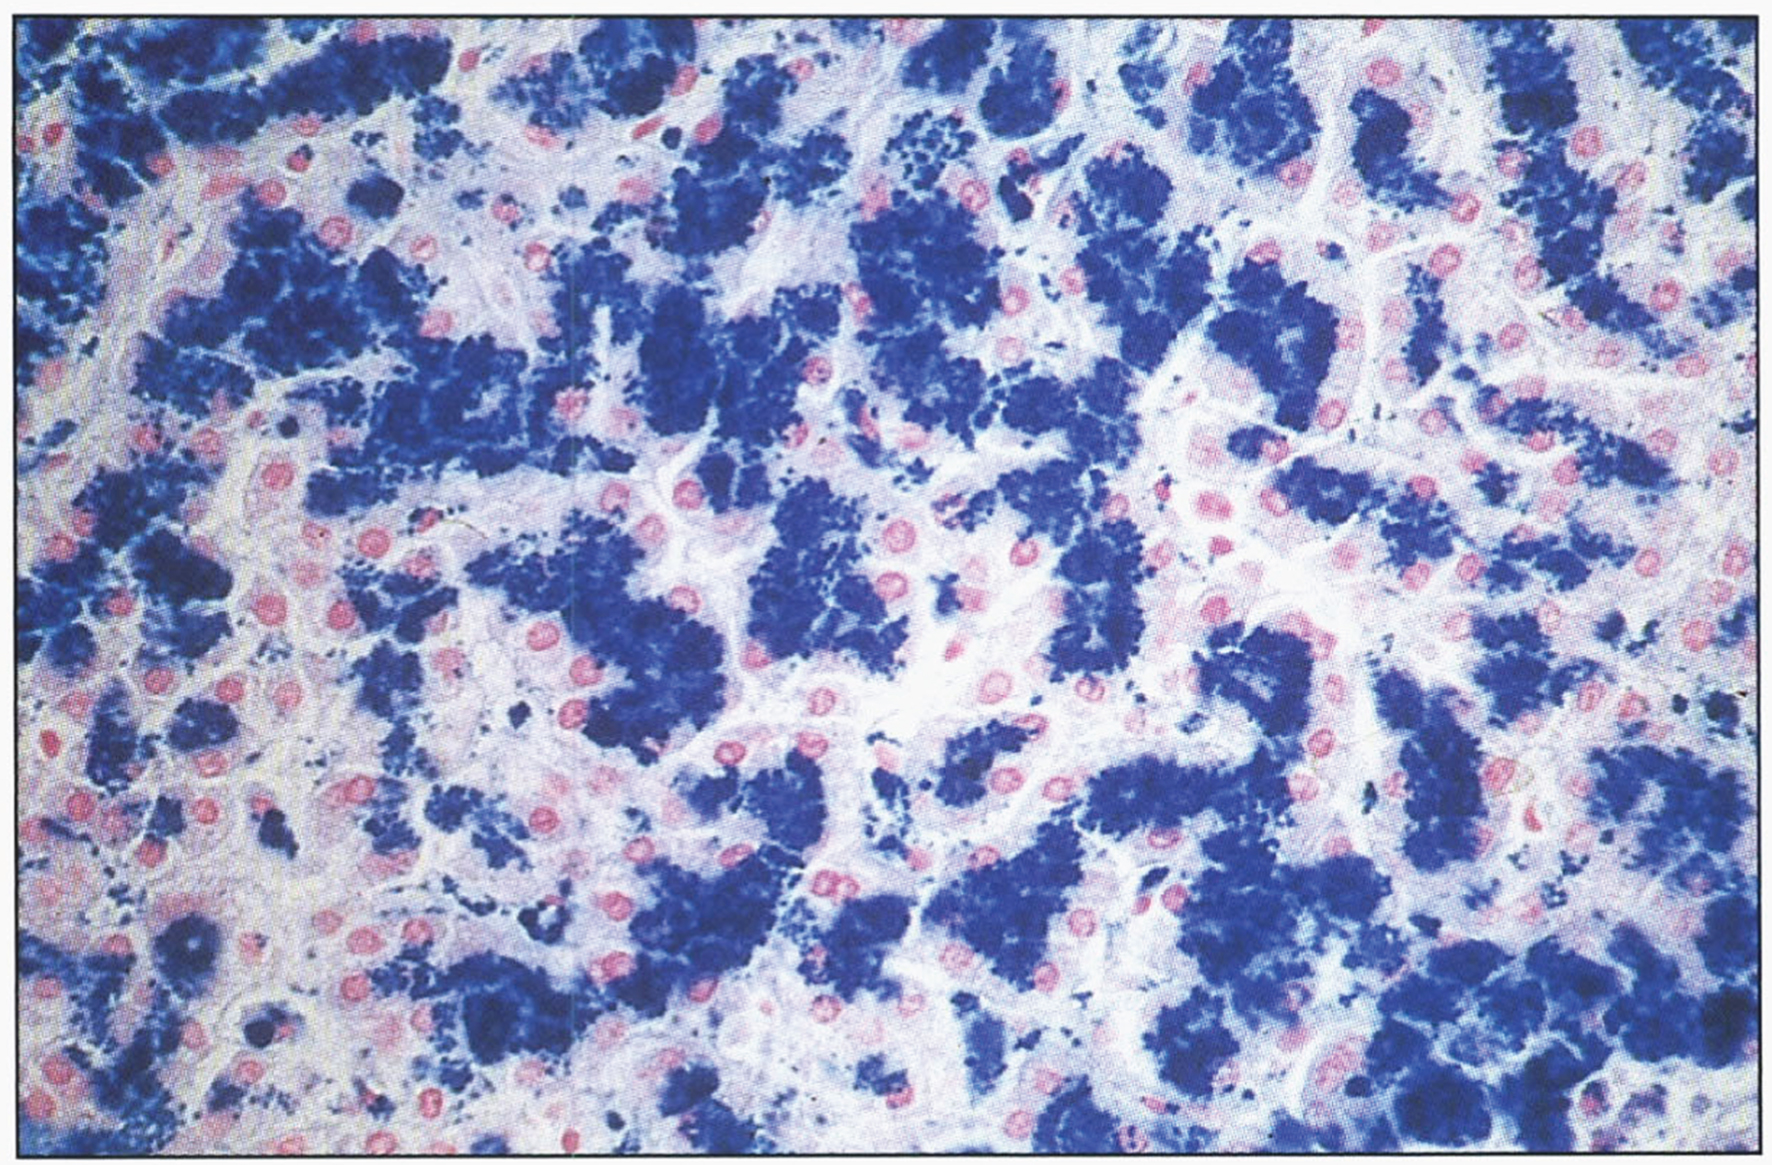 Microscopic appearance of liver in hereditary hemochromatosis showing iron in hepatocytes. Prussian blue stain.